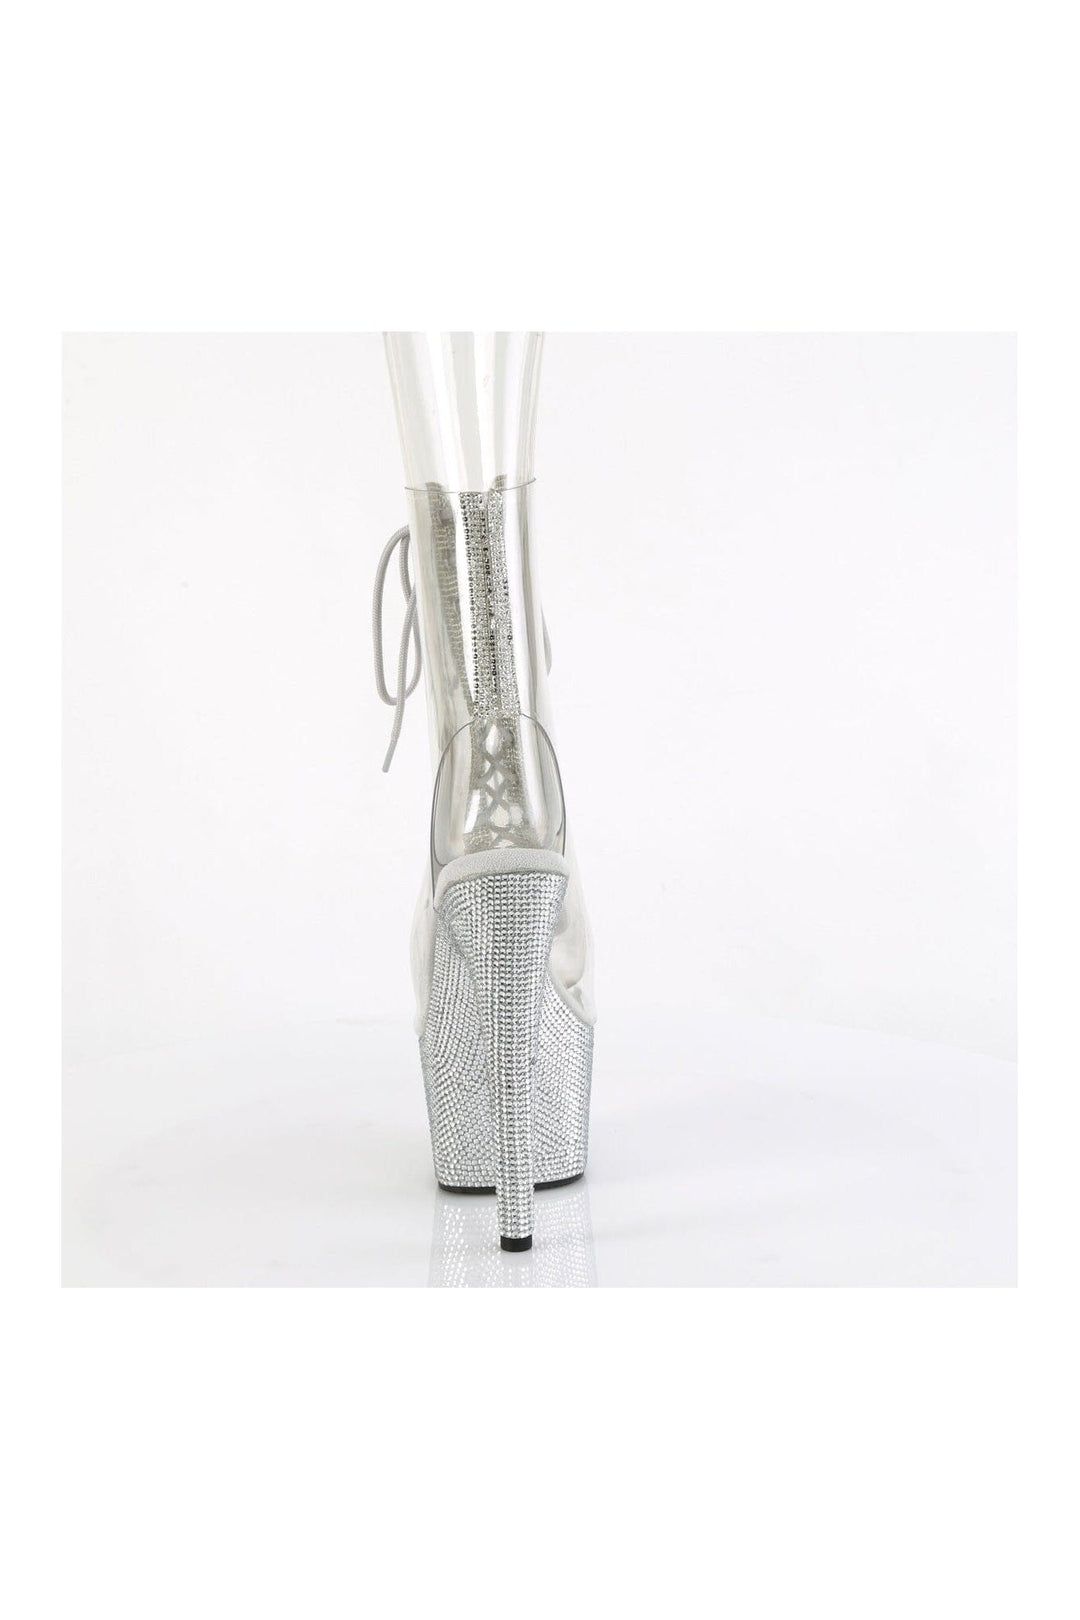 BEJEWELED-1016C-2-7 Clear Vinyl Ankle Boot-Ankle Boots-Pleaser-SEXYSHOES.COM